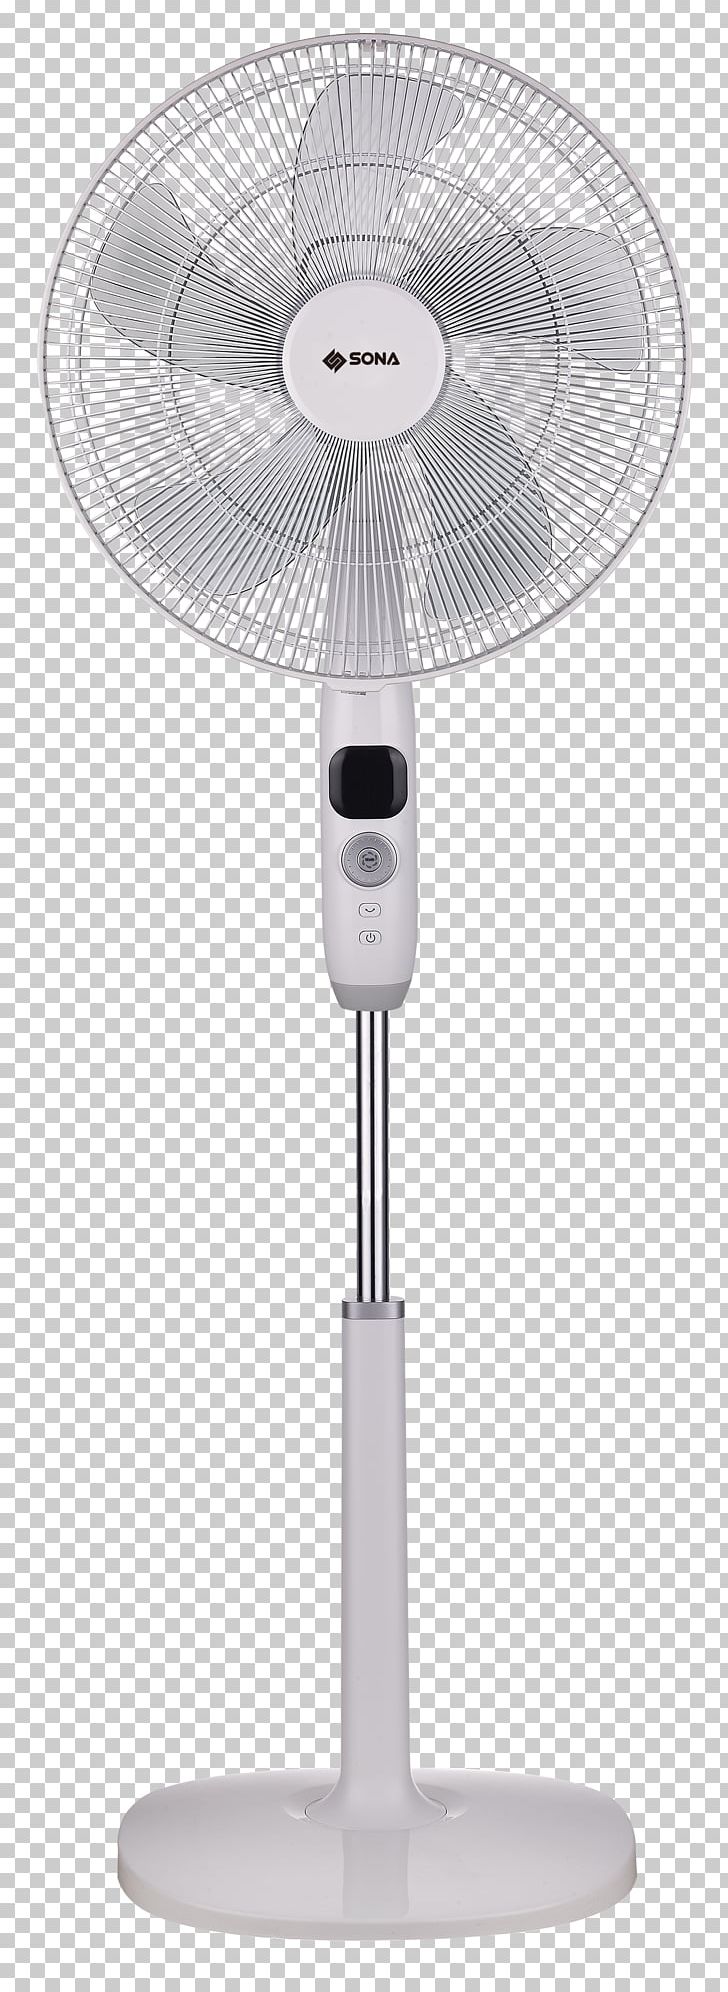 Computer Fan Ceiling Fans Cooler Master Remote Controls PNG, Clipart, Air Conditioner, Air Conditioning, Blade, Ceiling Fans, Clothes Dryer Free PNG Download